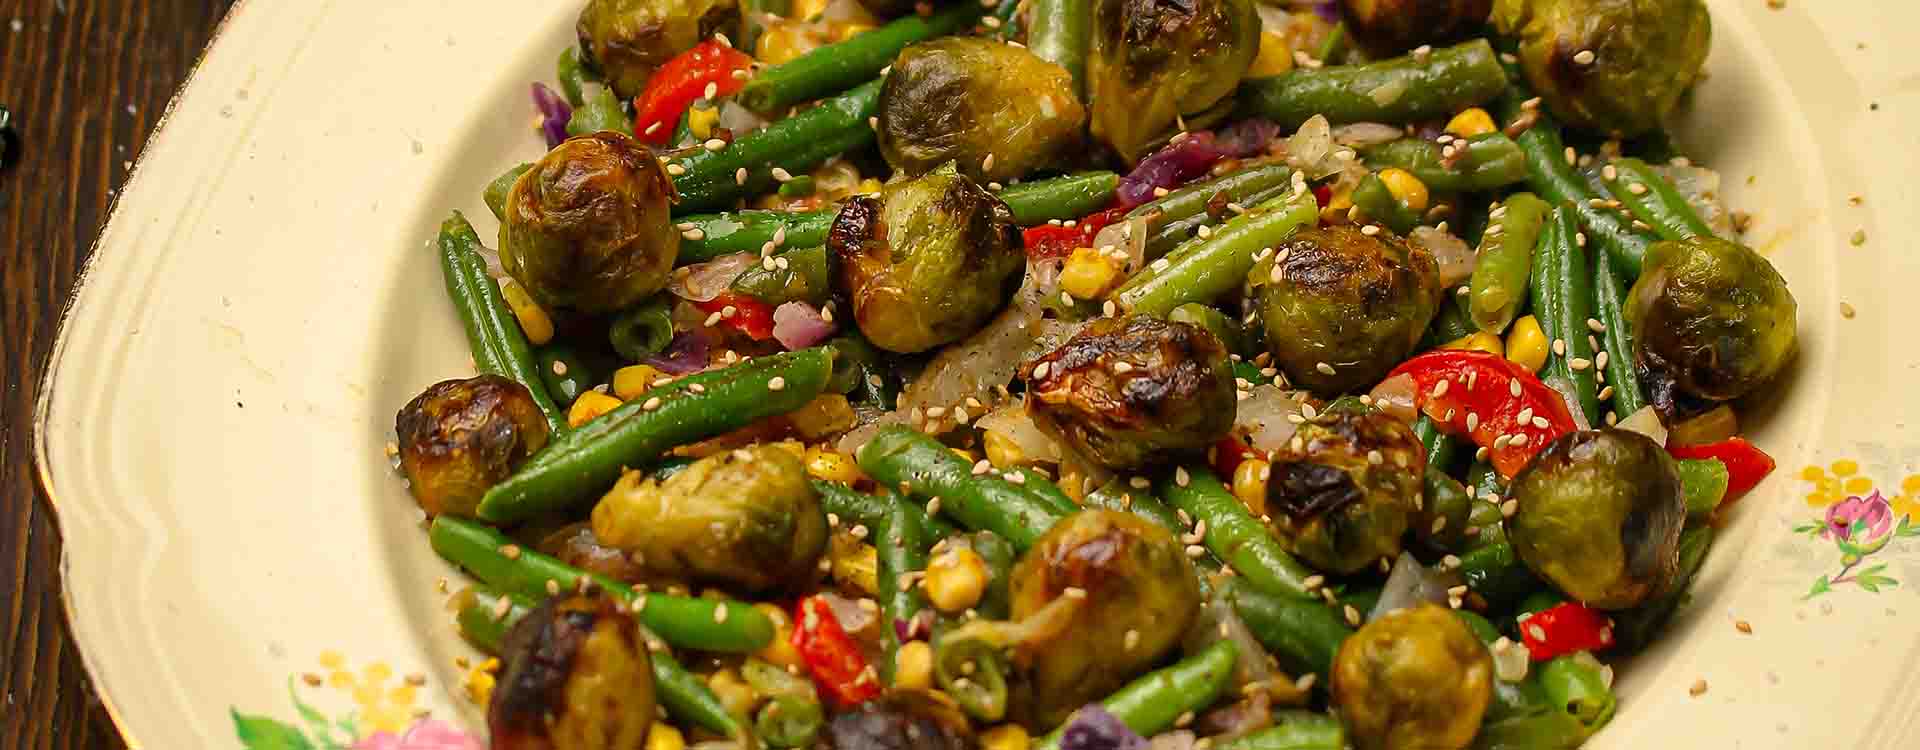 Brussel Sprout And Stir Fry Veg Salad